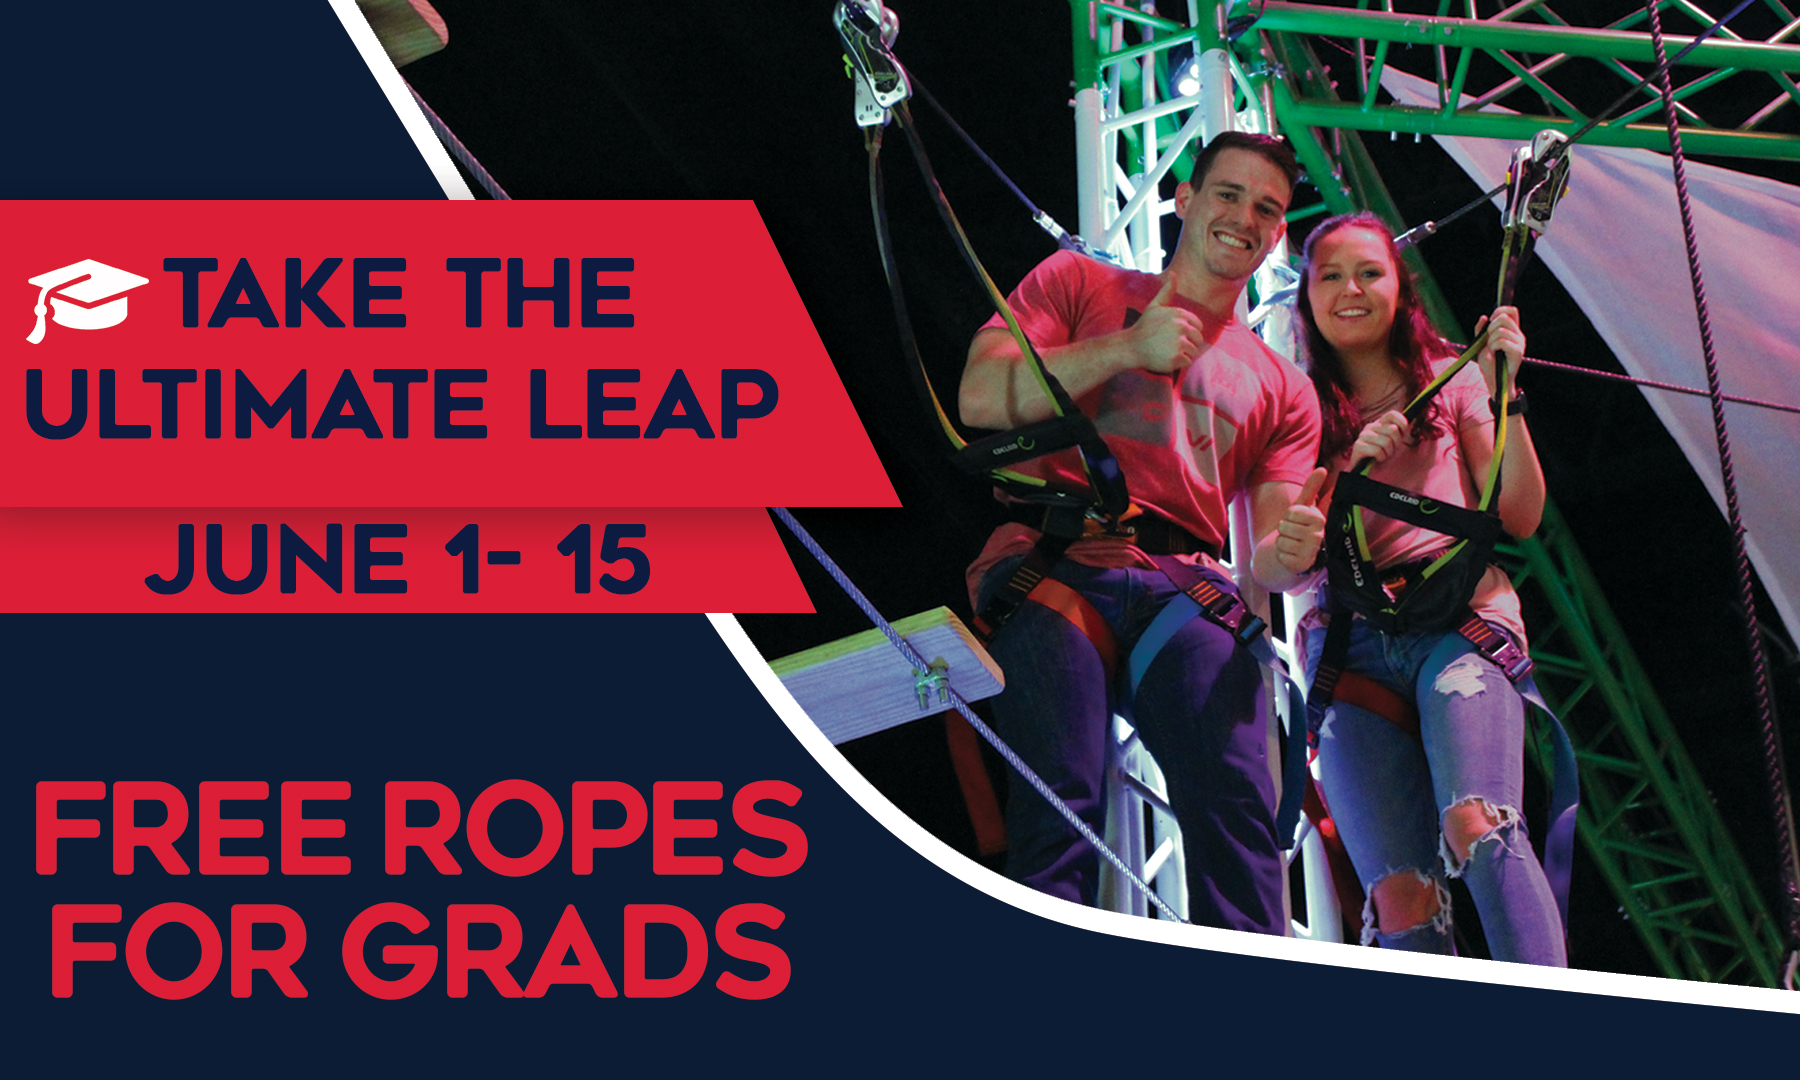 Calling All Grads – Take the Ultimate Leap!